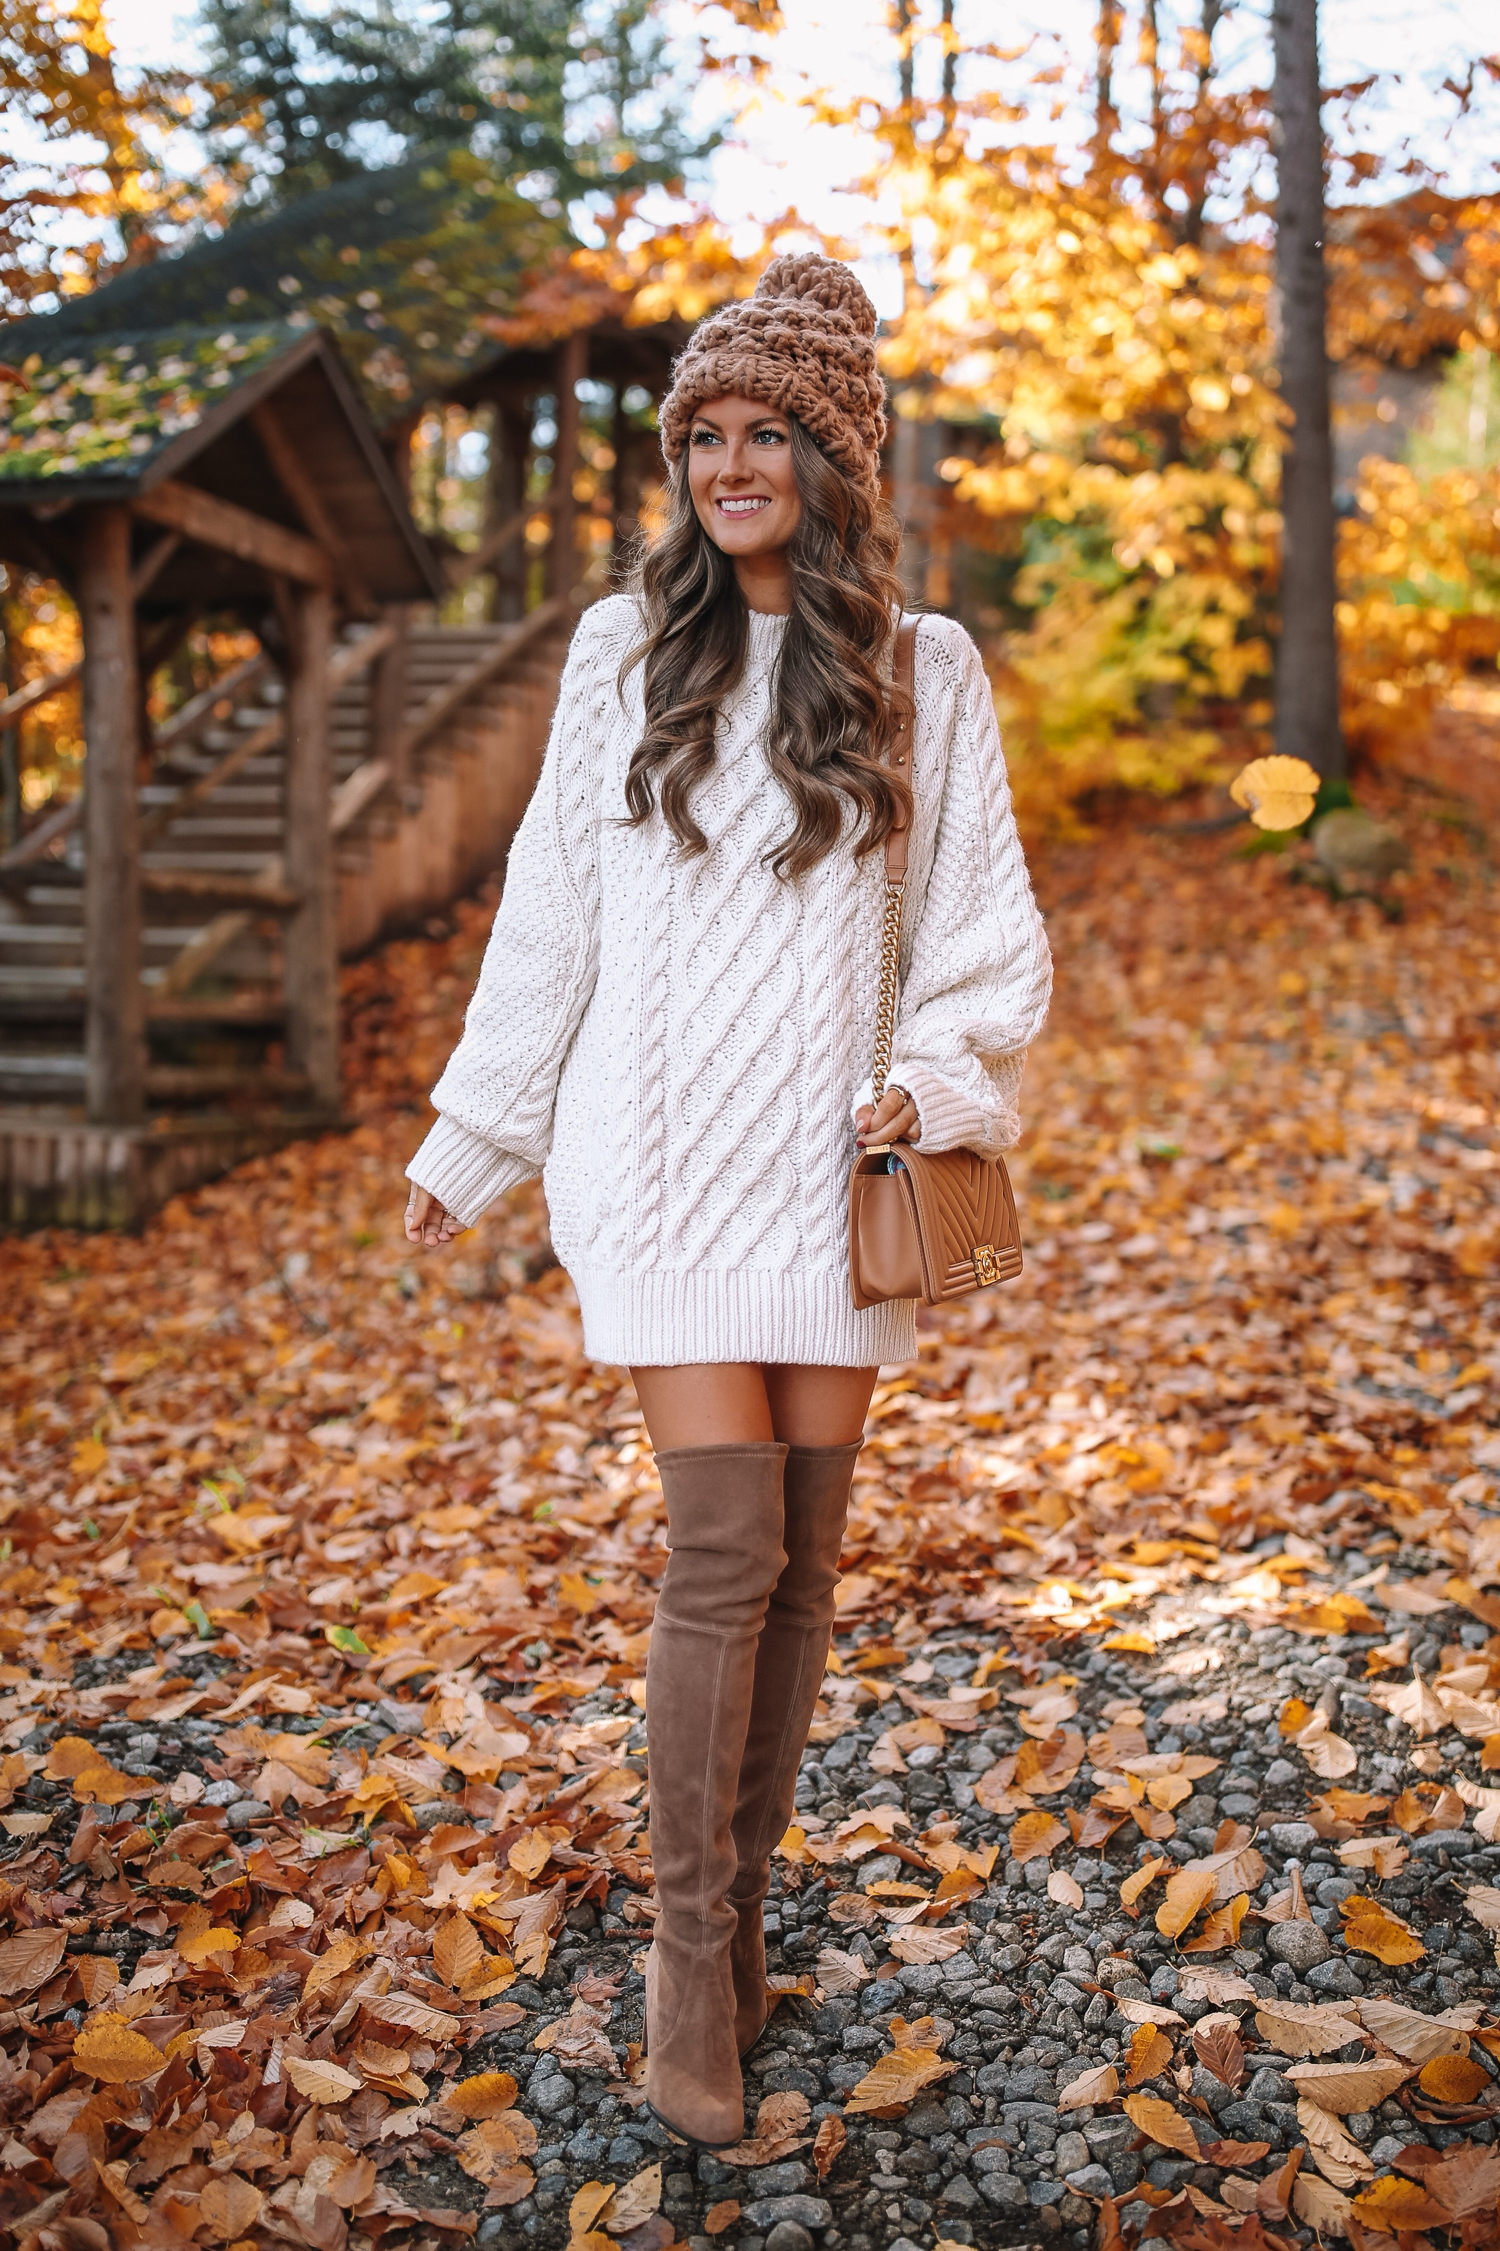 https://www.southerncurlsandpearls.com/wp-content/uploads/2020/10/hm-sweater-dress-over-the-knee-boots-beanie-11.jpg